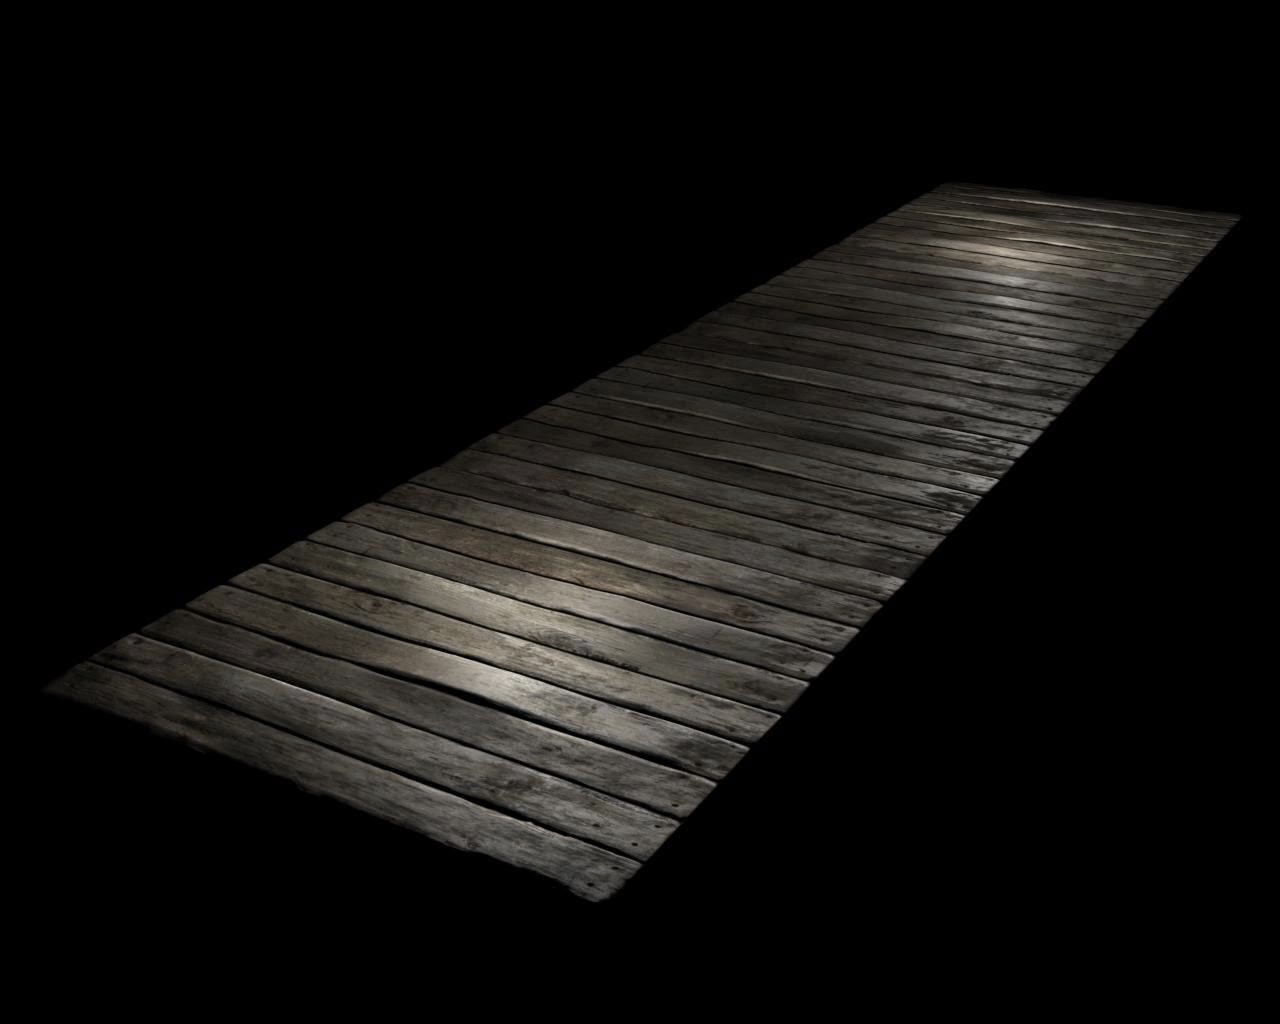 Wooden plank material using tesselation.